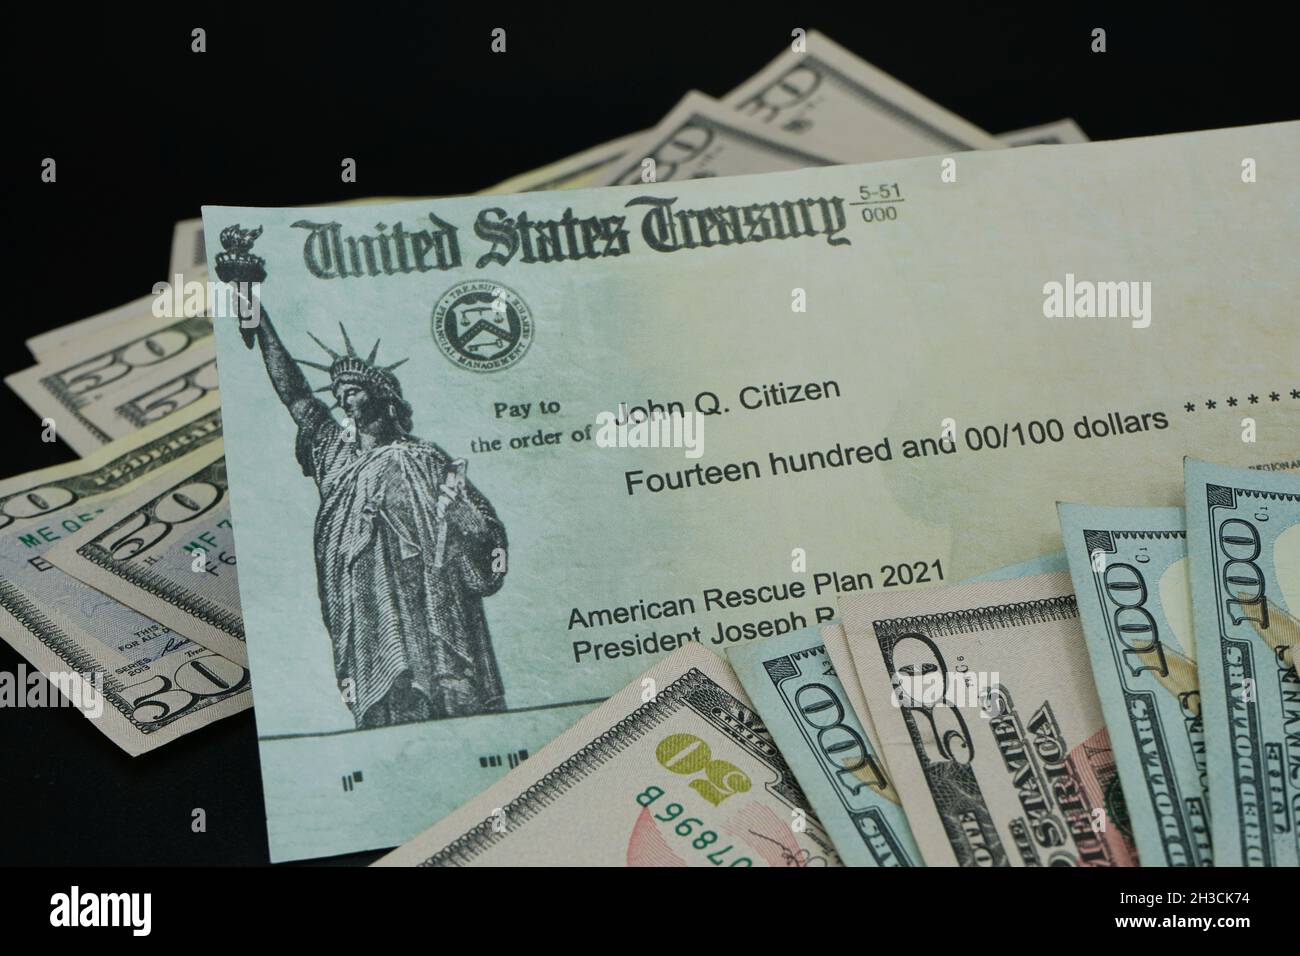 Lale Elsinore, CA - October 26, 2021: United States Treasury check with US currency. Stock Photo